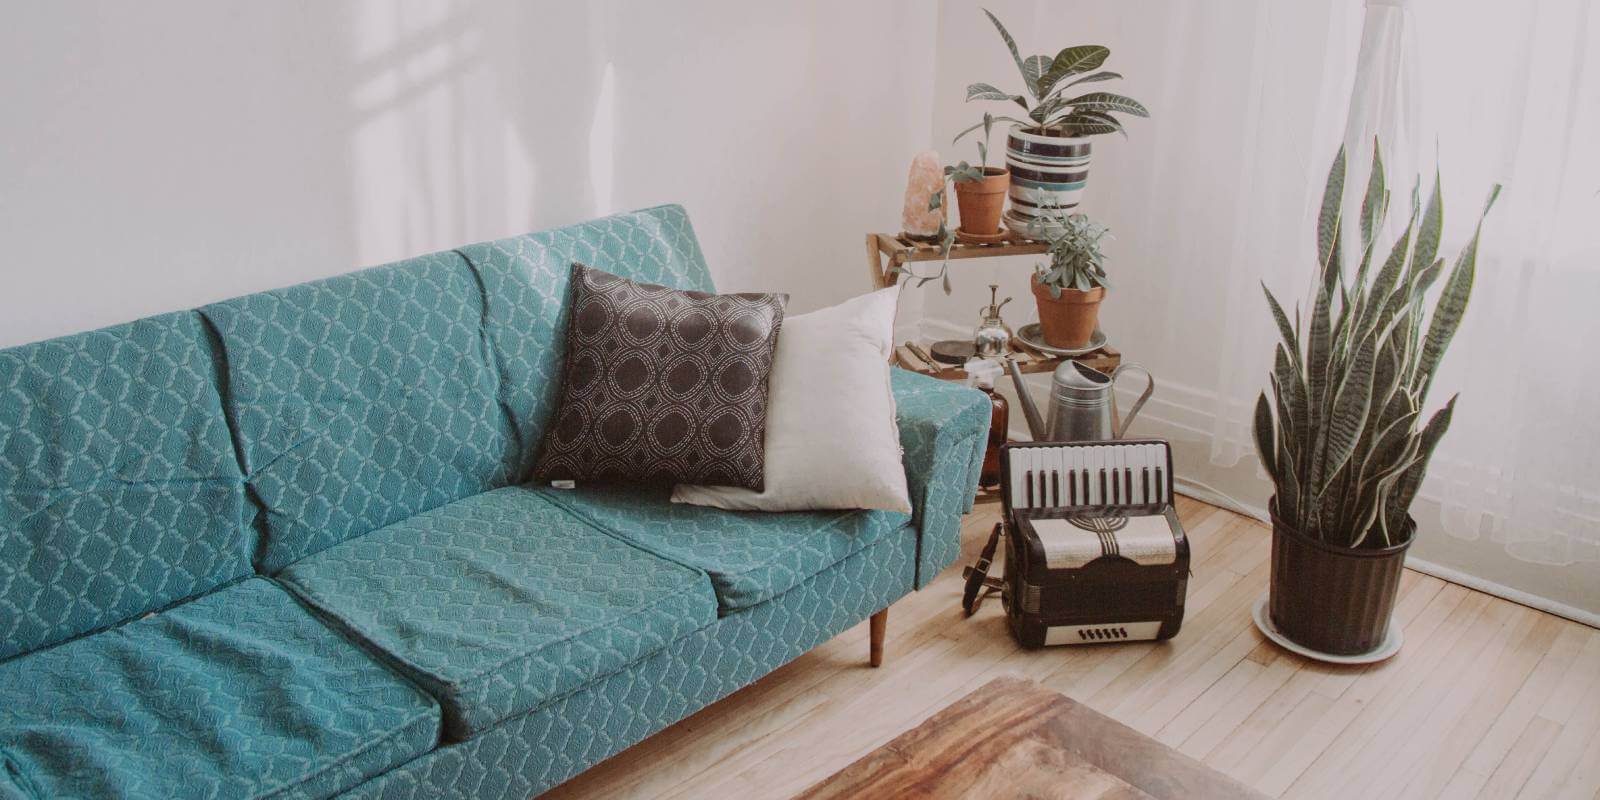 6 Simple Ways To Make Your Home Feel Cozier